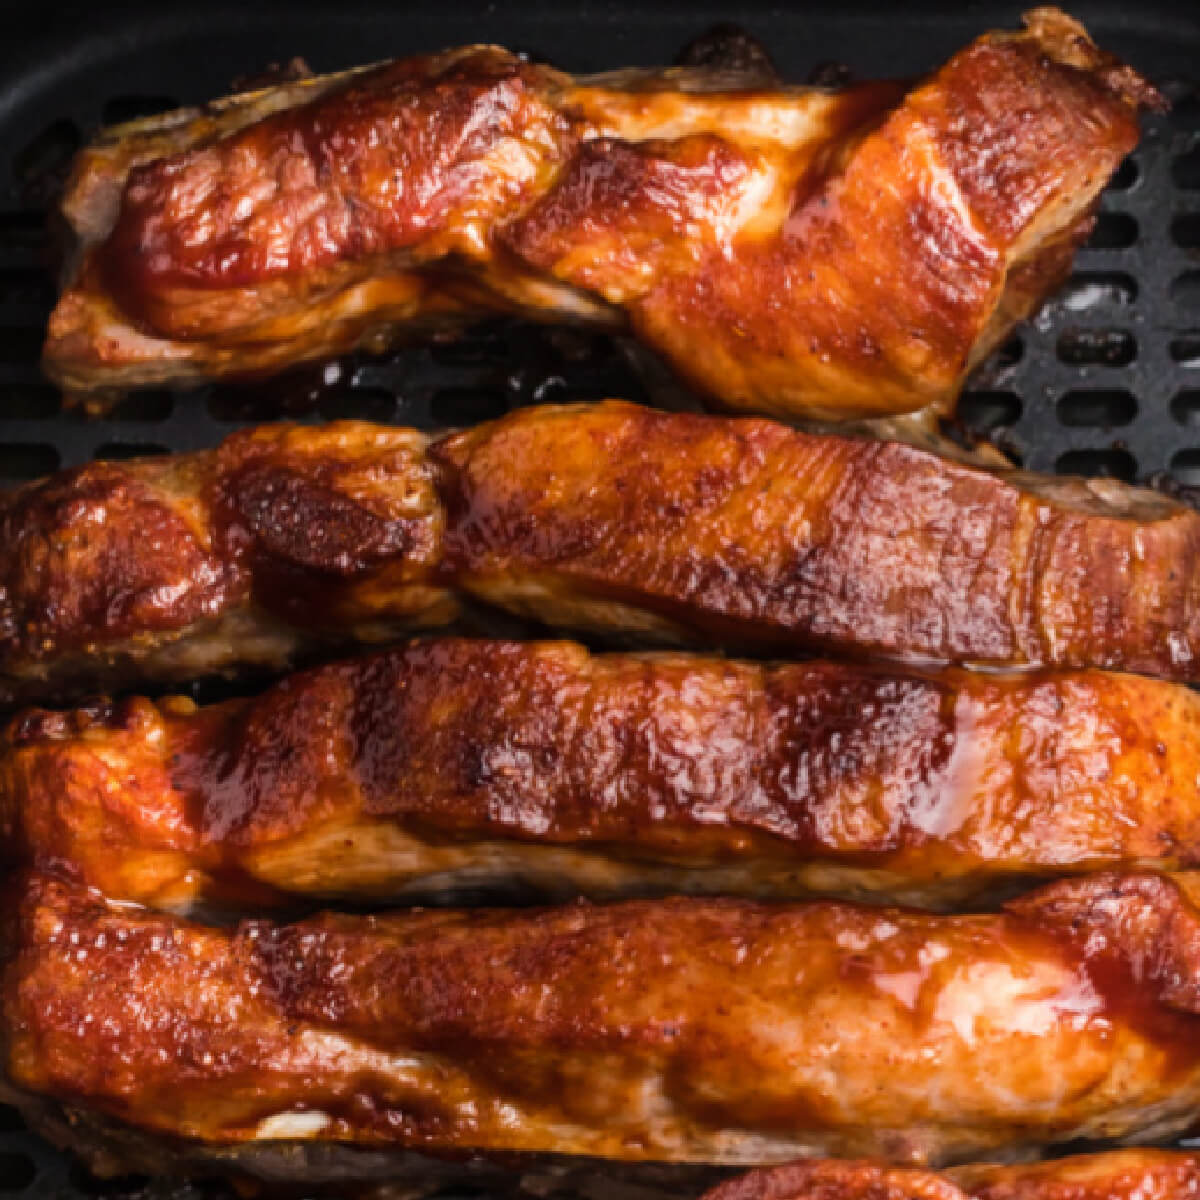 Ribs being reheated in the basket of the air fryer.